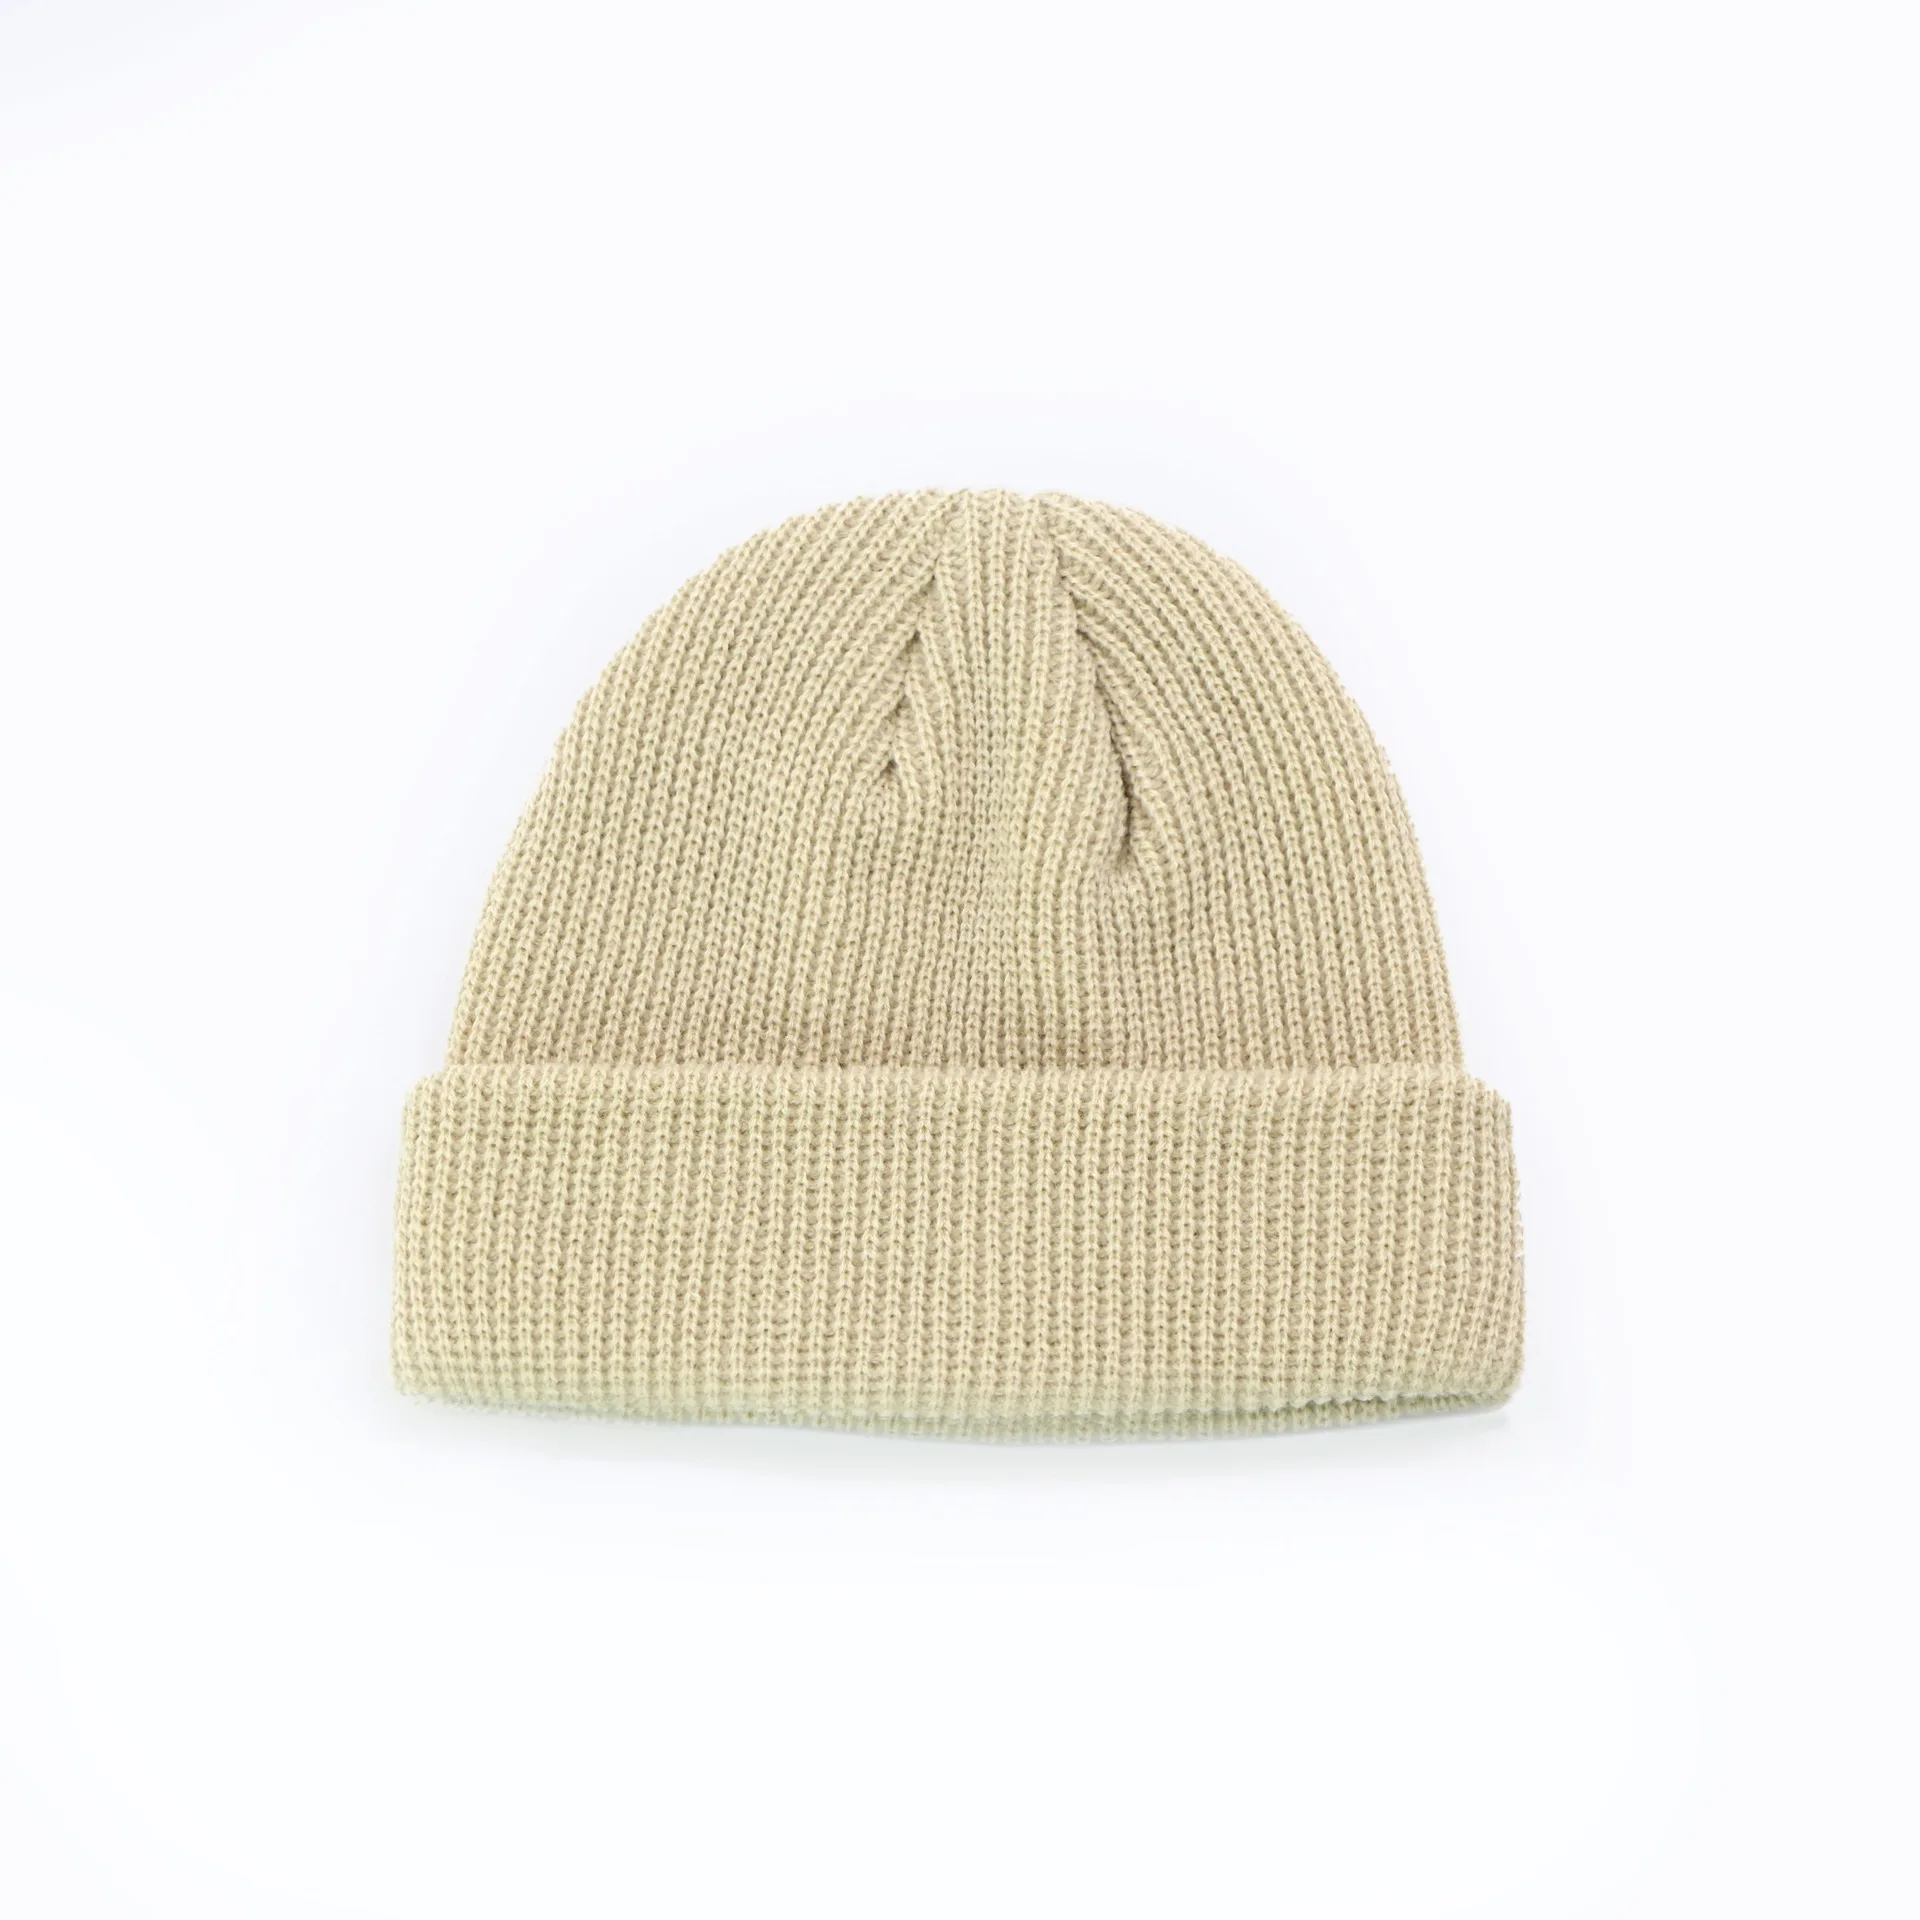 Style Beanies Knitted Hats Solid Color Caps For Autumn Winter Men Short Head Cap Outdoor Warm Street Head Leisure Women Hat